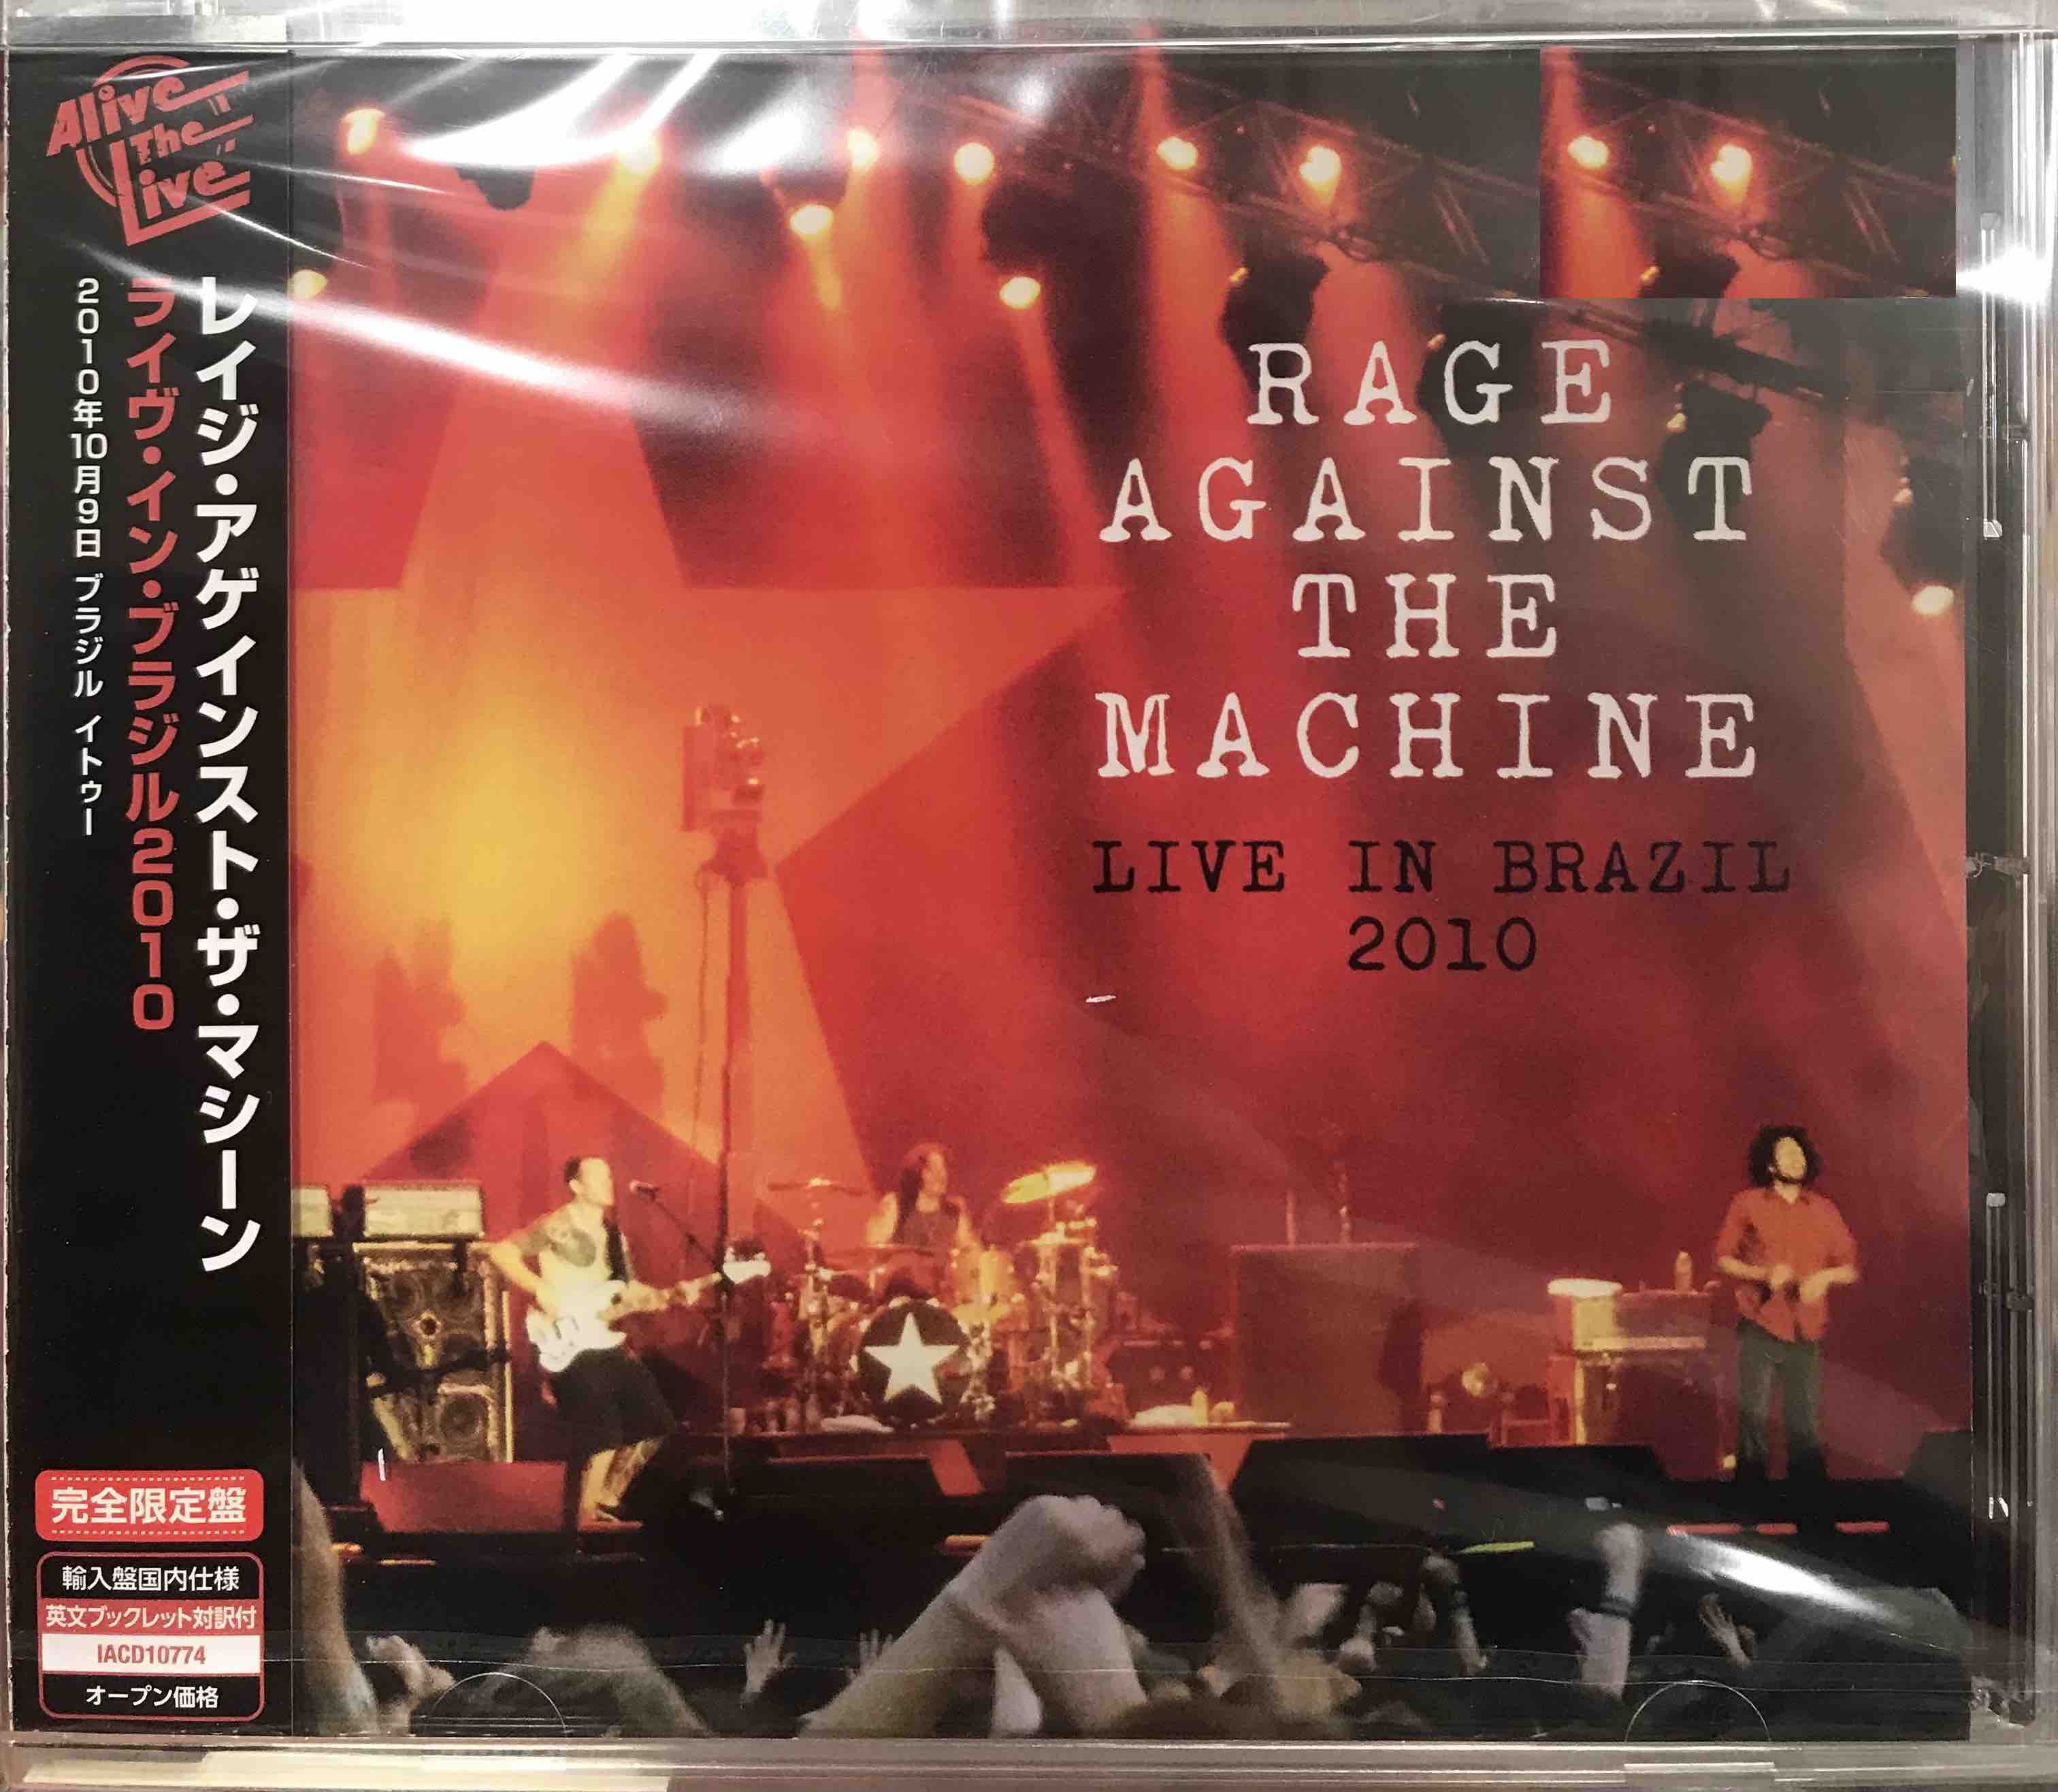 Rage Against The Machine - Live In Brazil 2010